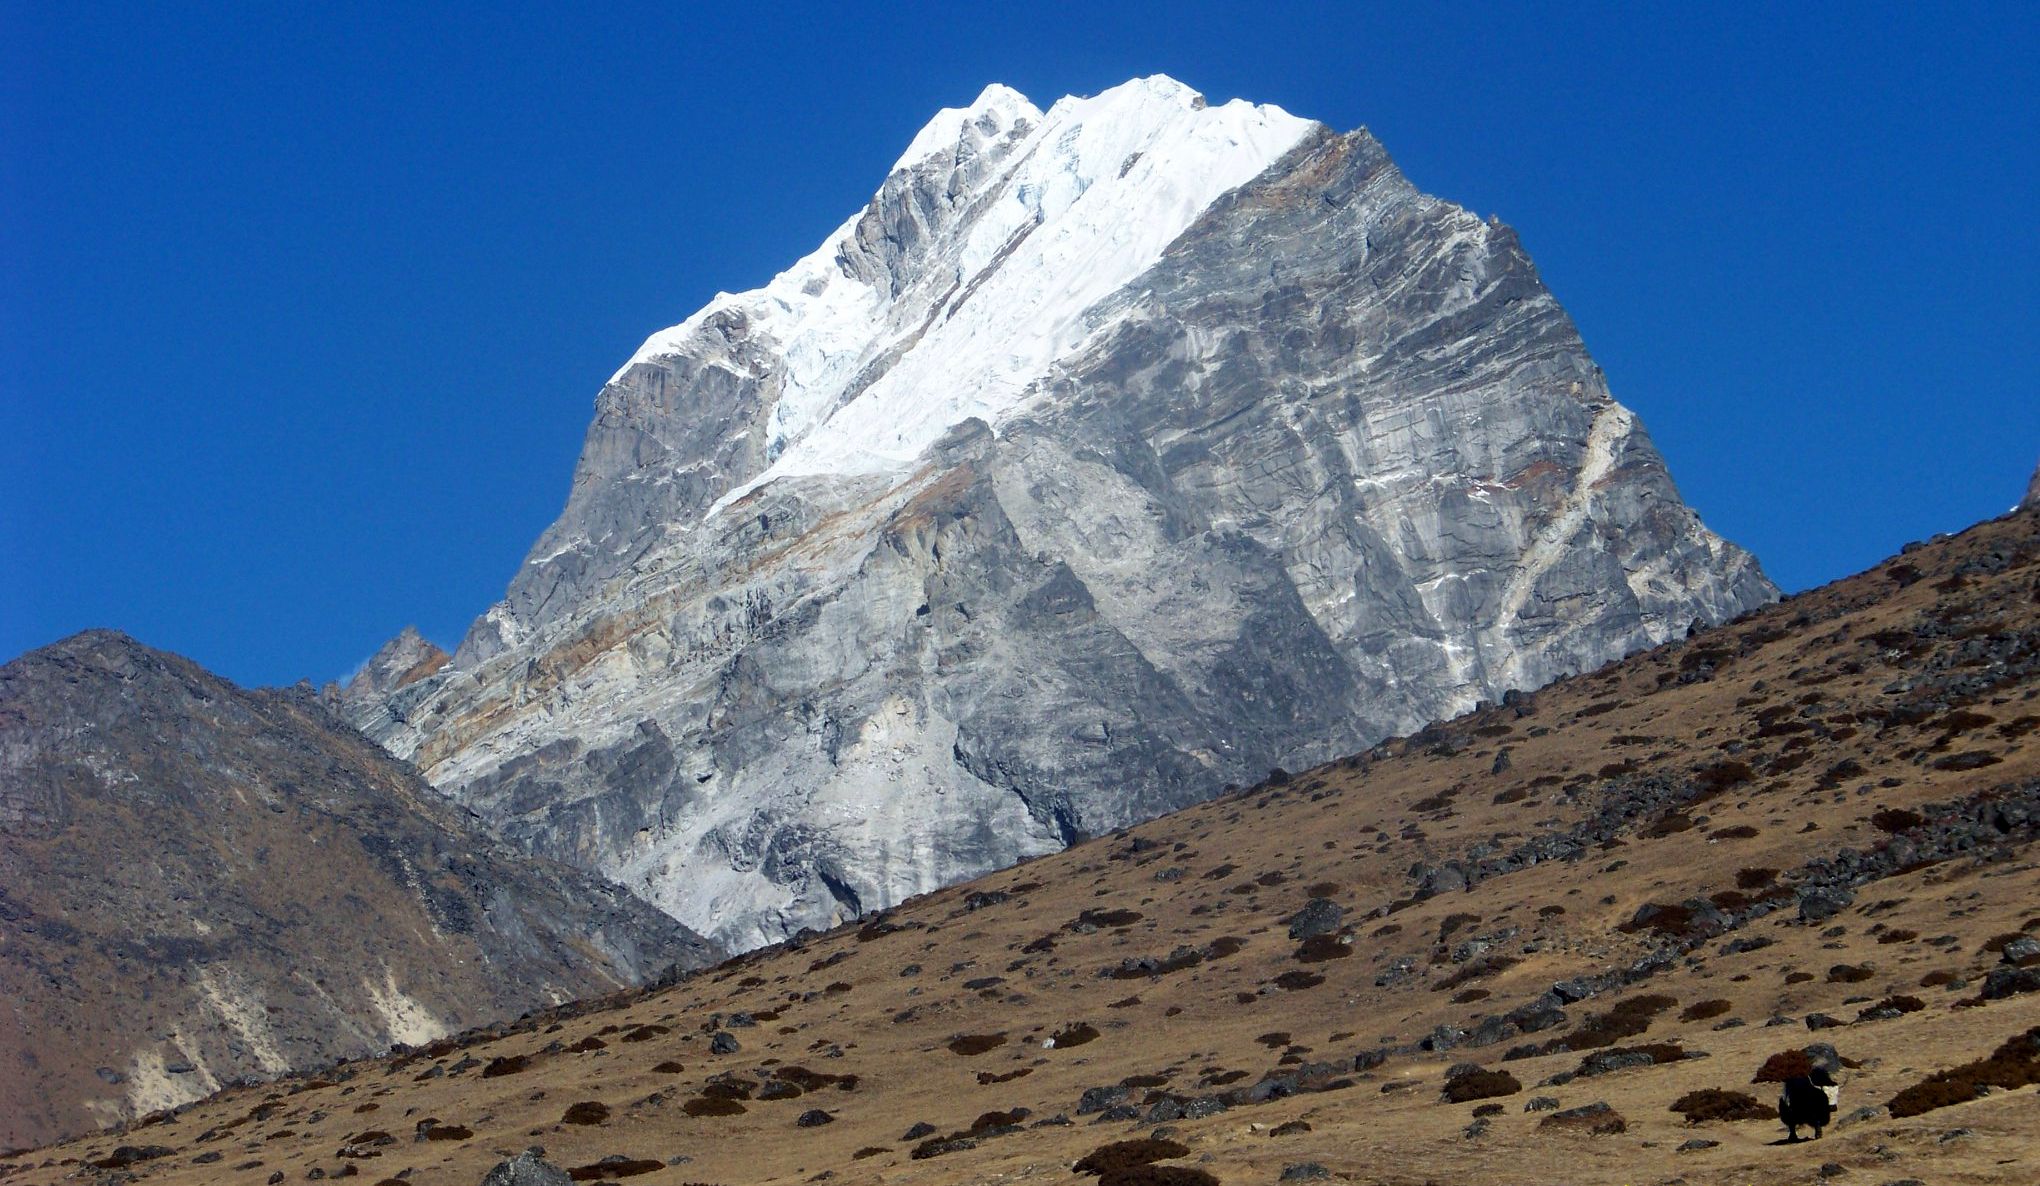 Mount Taboche on route to Everest Base Camp